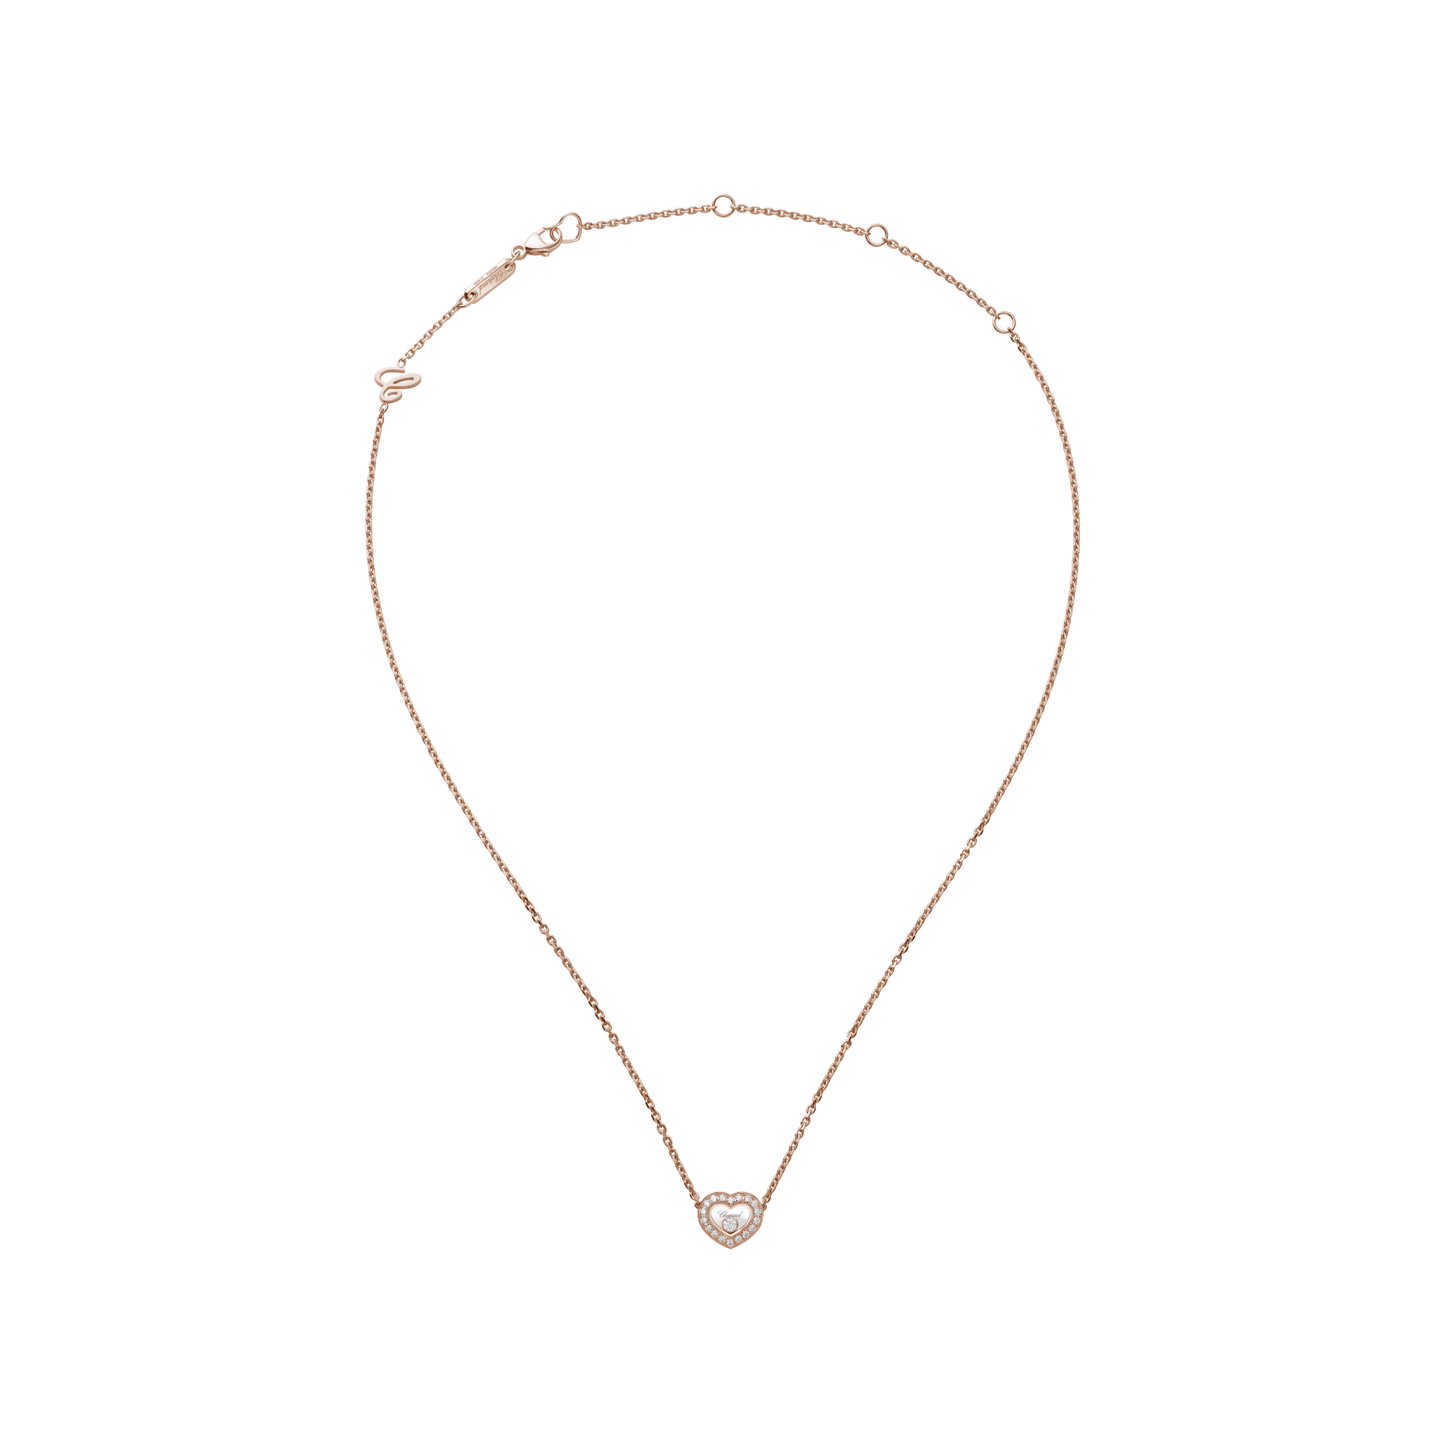 HAPPY DIAMONDS ICONS NECKLACE, ETHICAL ROSE GOLD, DIAMONDS 81A054-5201